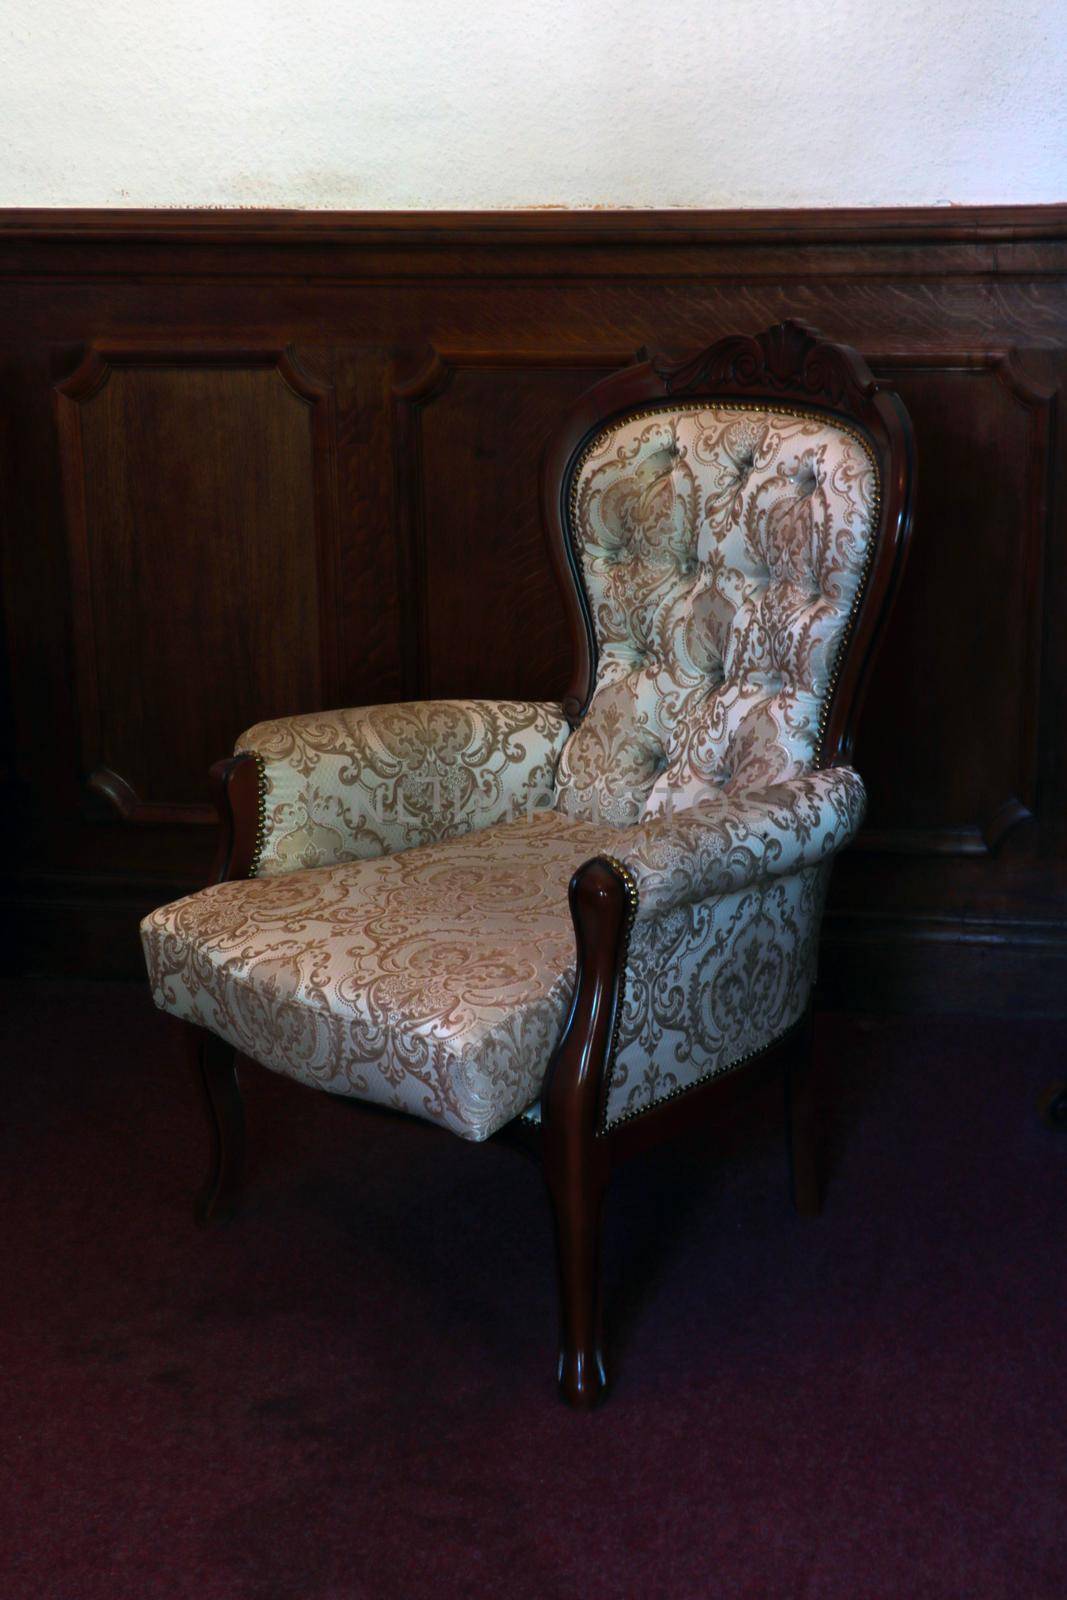 Close-up of a large beautiful luxury armchair. Interior